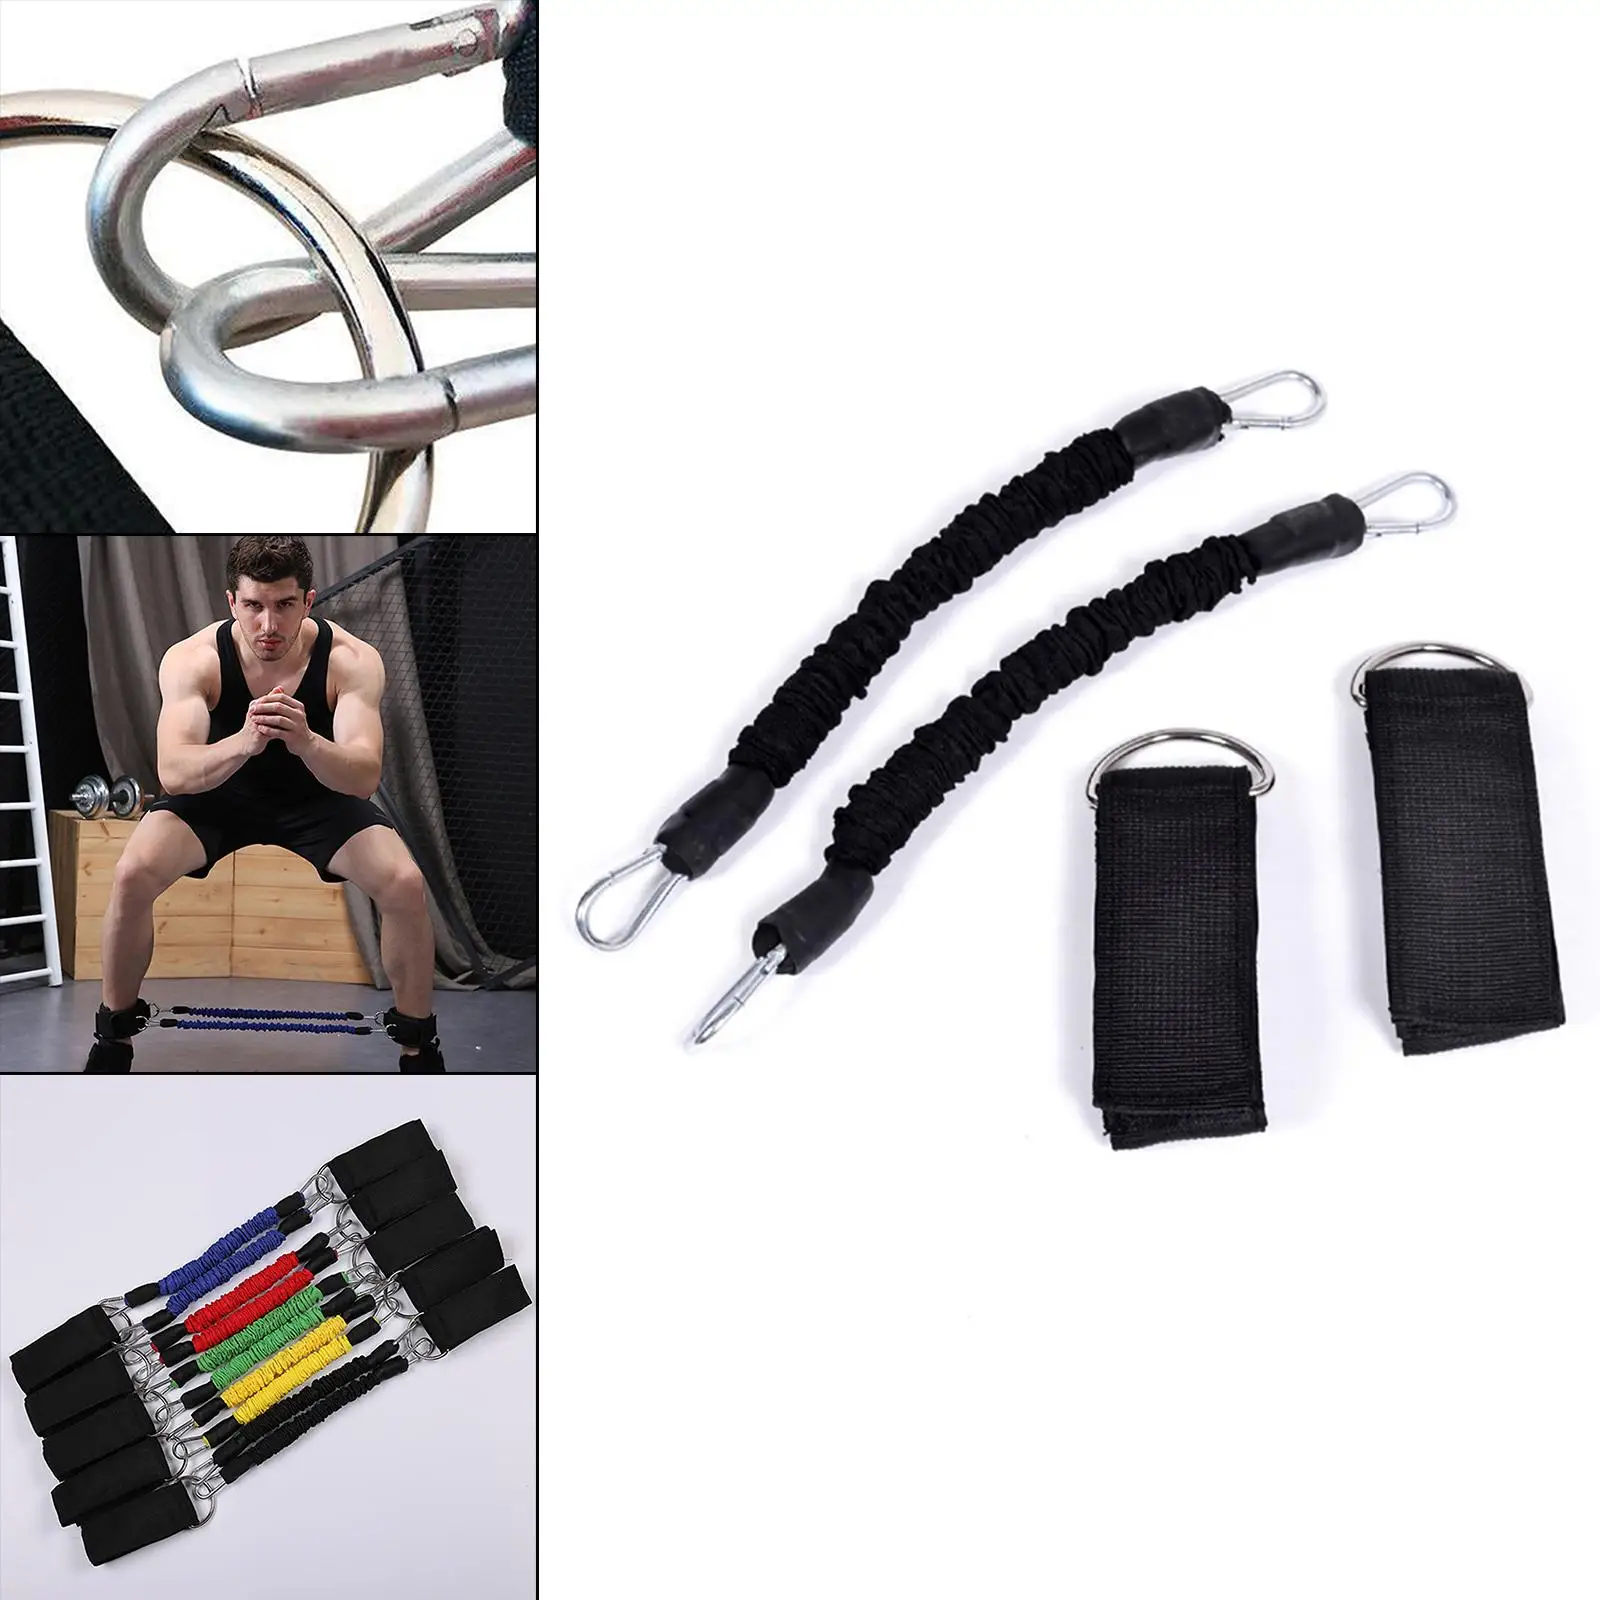 Leg Resistance Bands with Ankle Straps Resistance Training Yoga Training Workout  and Strength  Training Equipment Workout Band